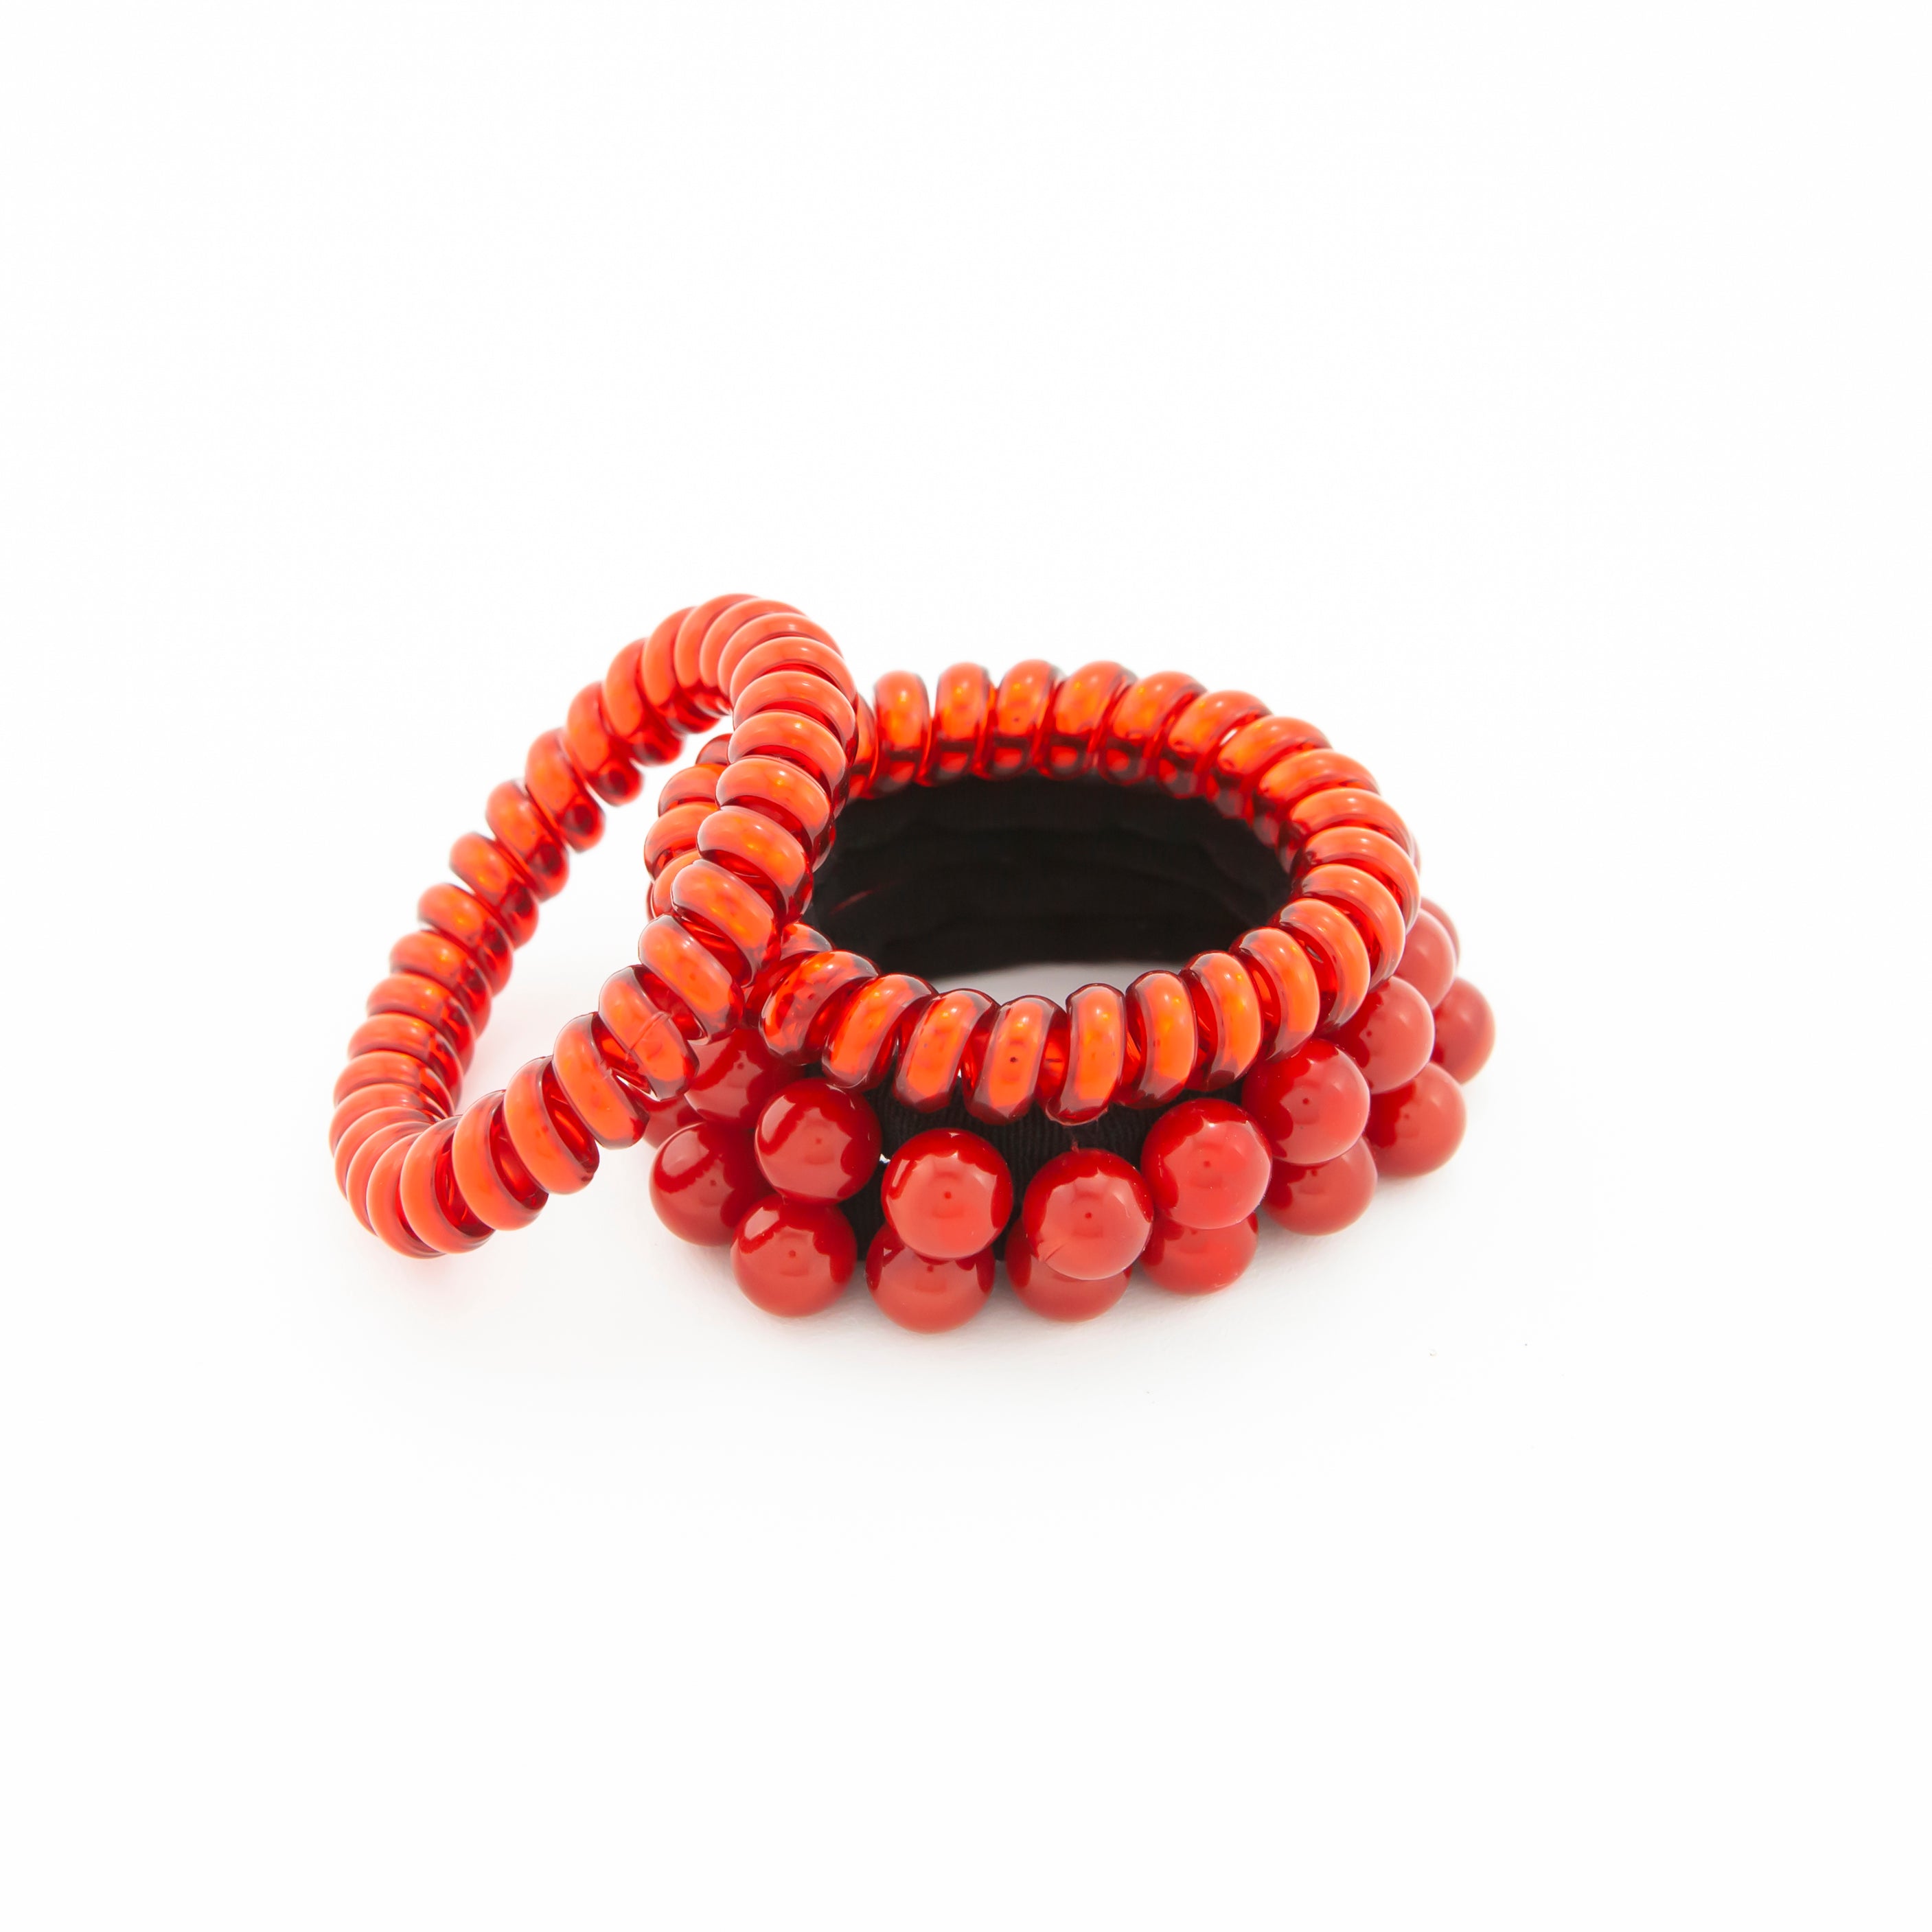 Hair Tie Red Phone Cord & Pearls - Pack of 4 | Shop Amina Beauty